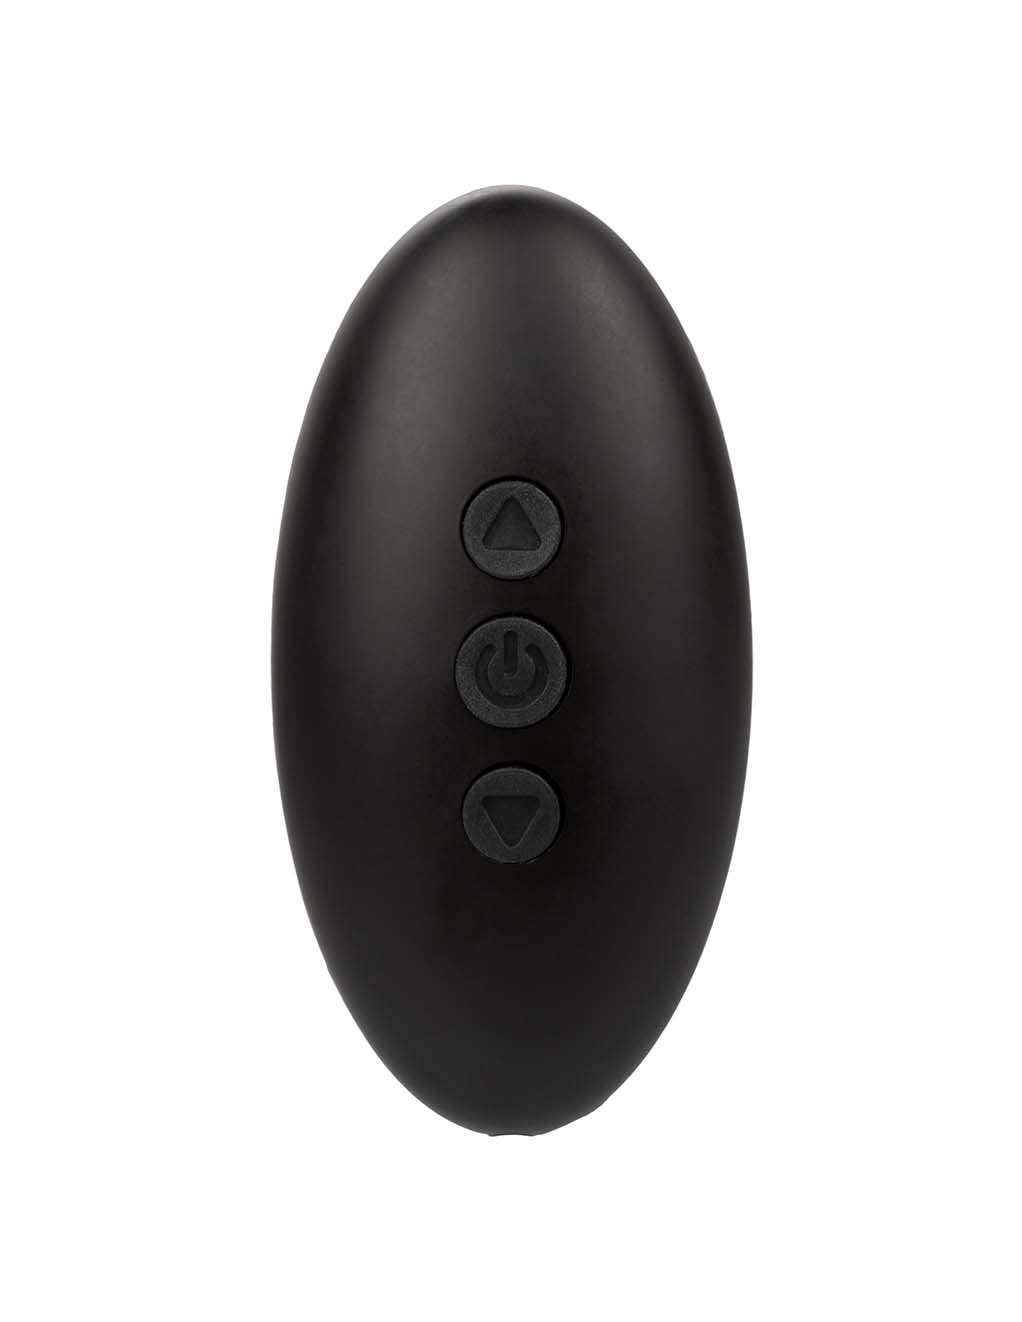 Her Royal Harness Me2 Remote Rumbler- Remote